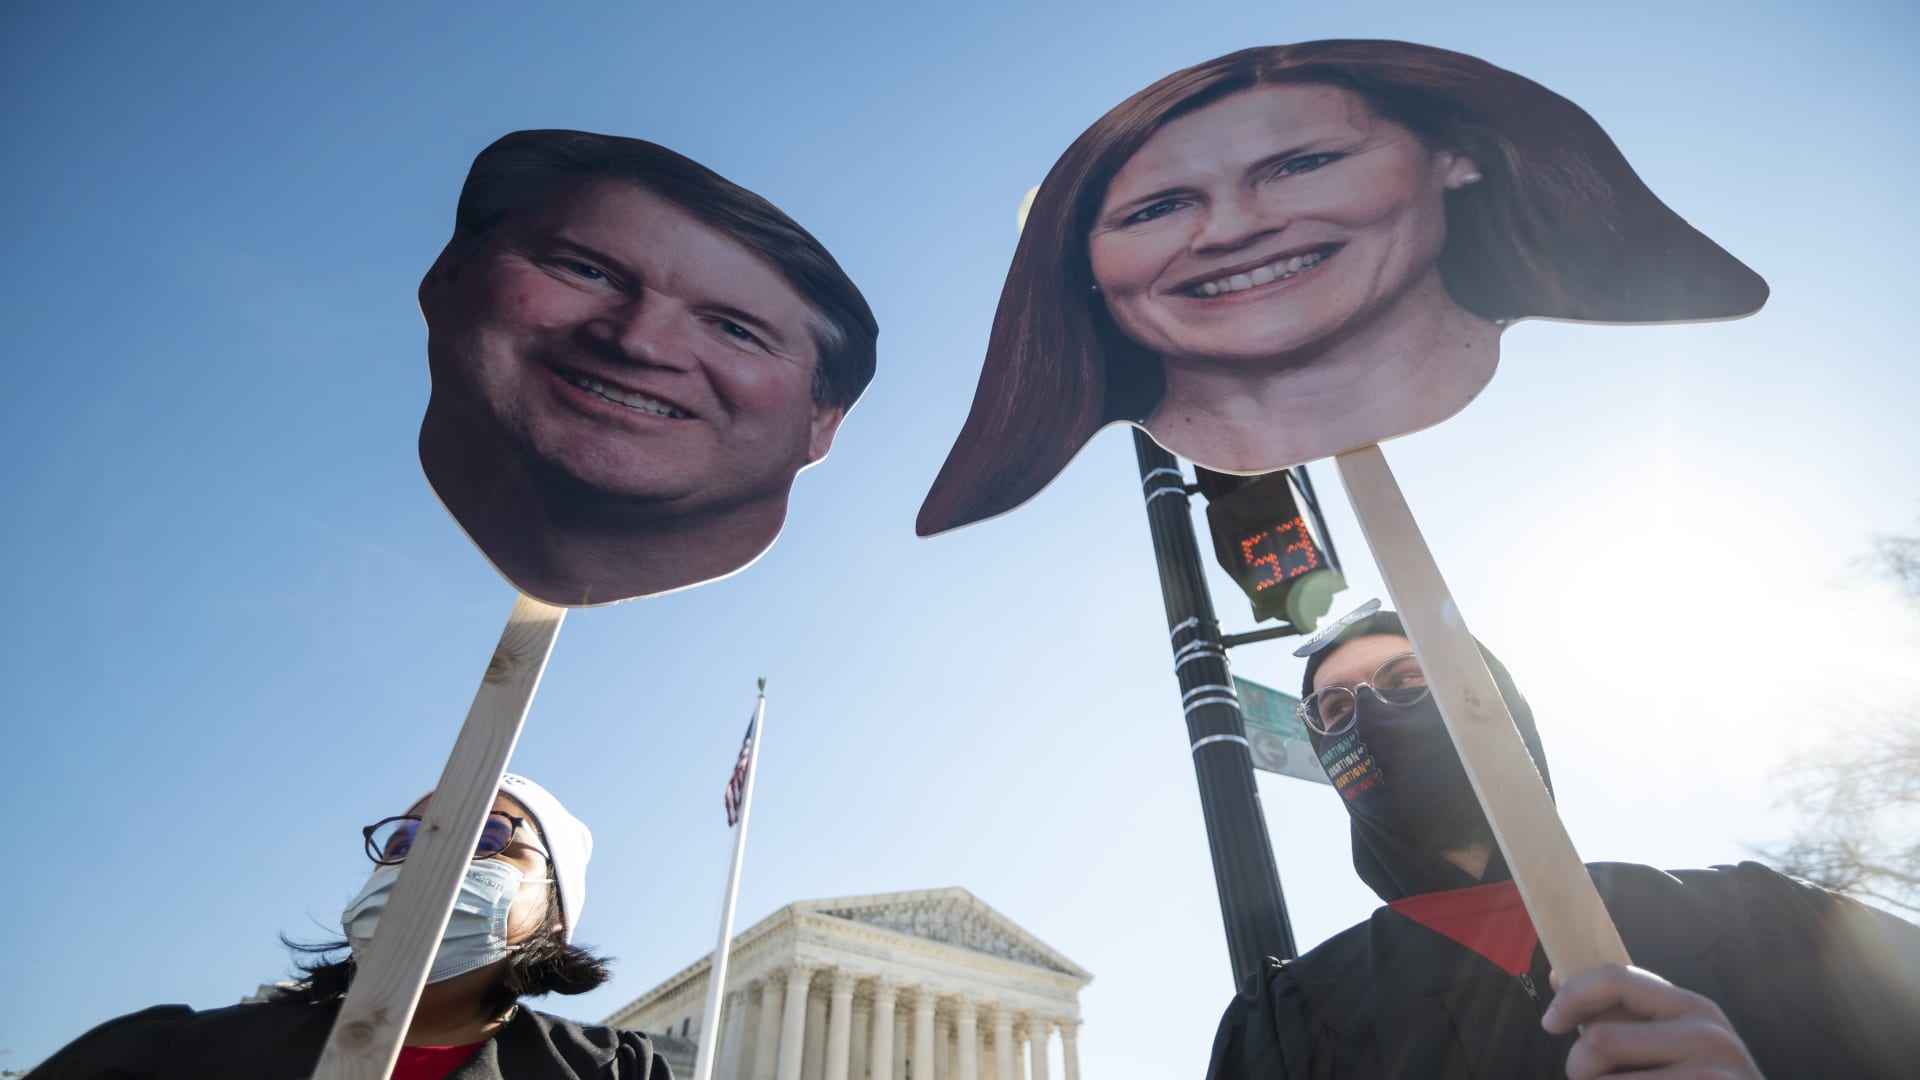 Reproductive rights activists hold cut out photos of Justices Brett Kavanaugh and Amy Coney Barrett as oral arguments in Dobbs v. Jackson Womens Health Organization case are held on Wednesday, December 1, 2021.